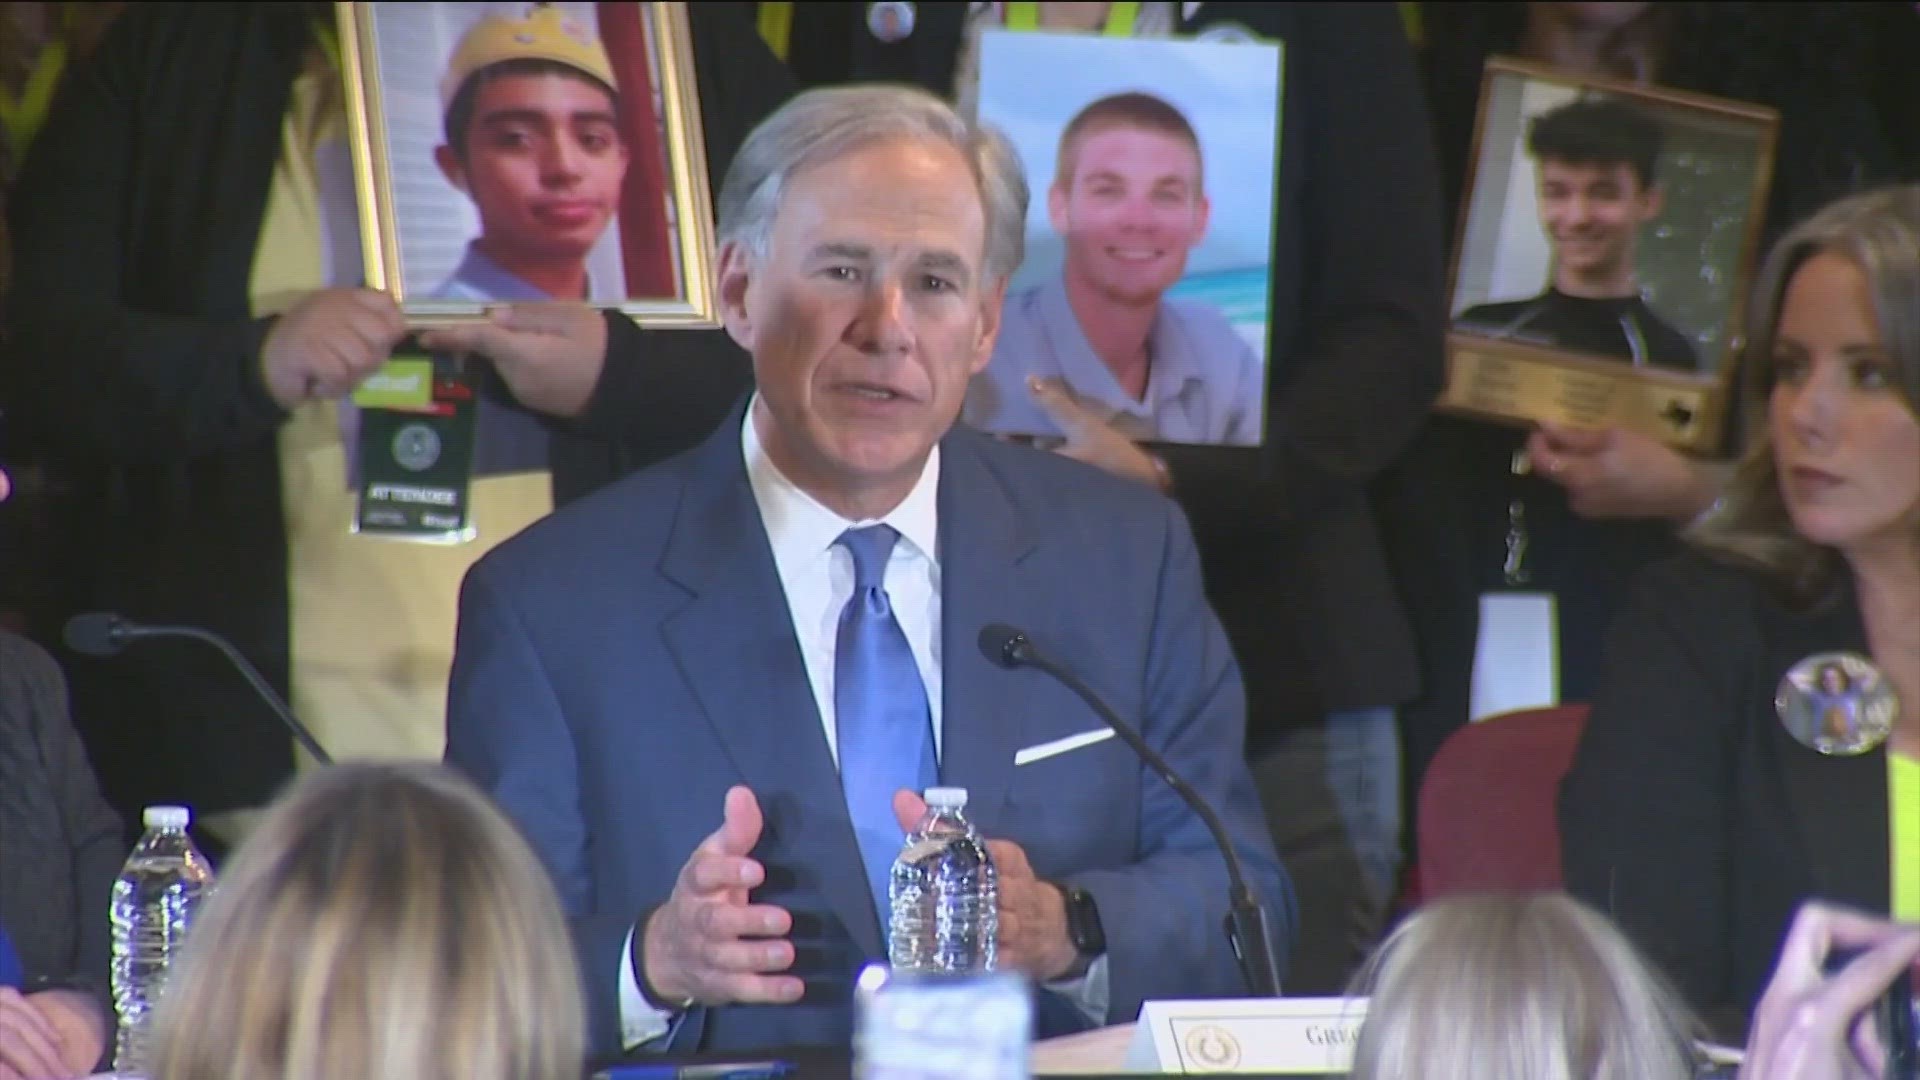 For the Summit, Governor Abbott invited families who have been affected by fentanyl to talk about how the state is handling it.